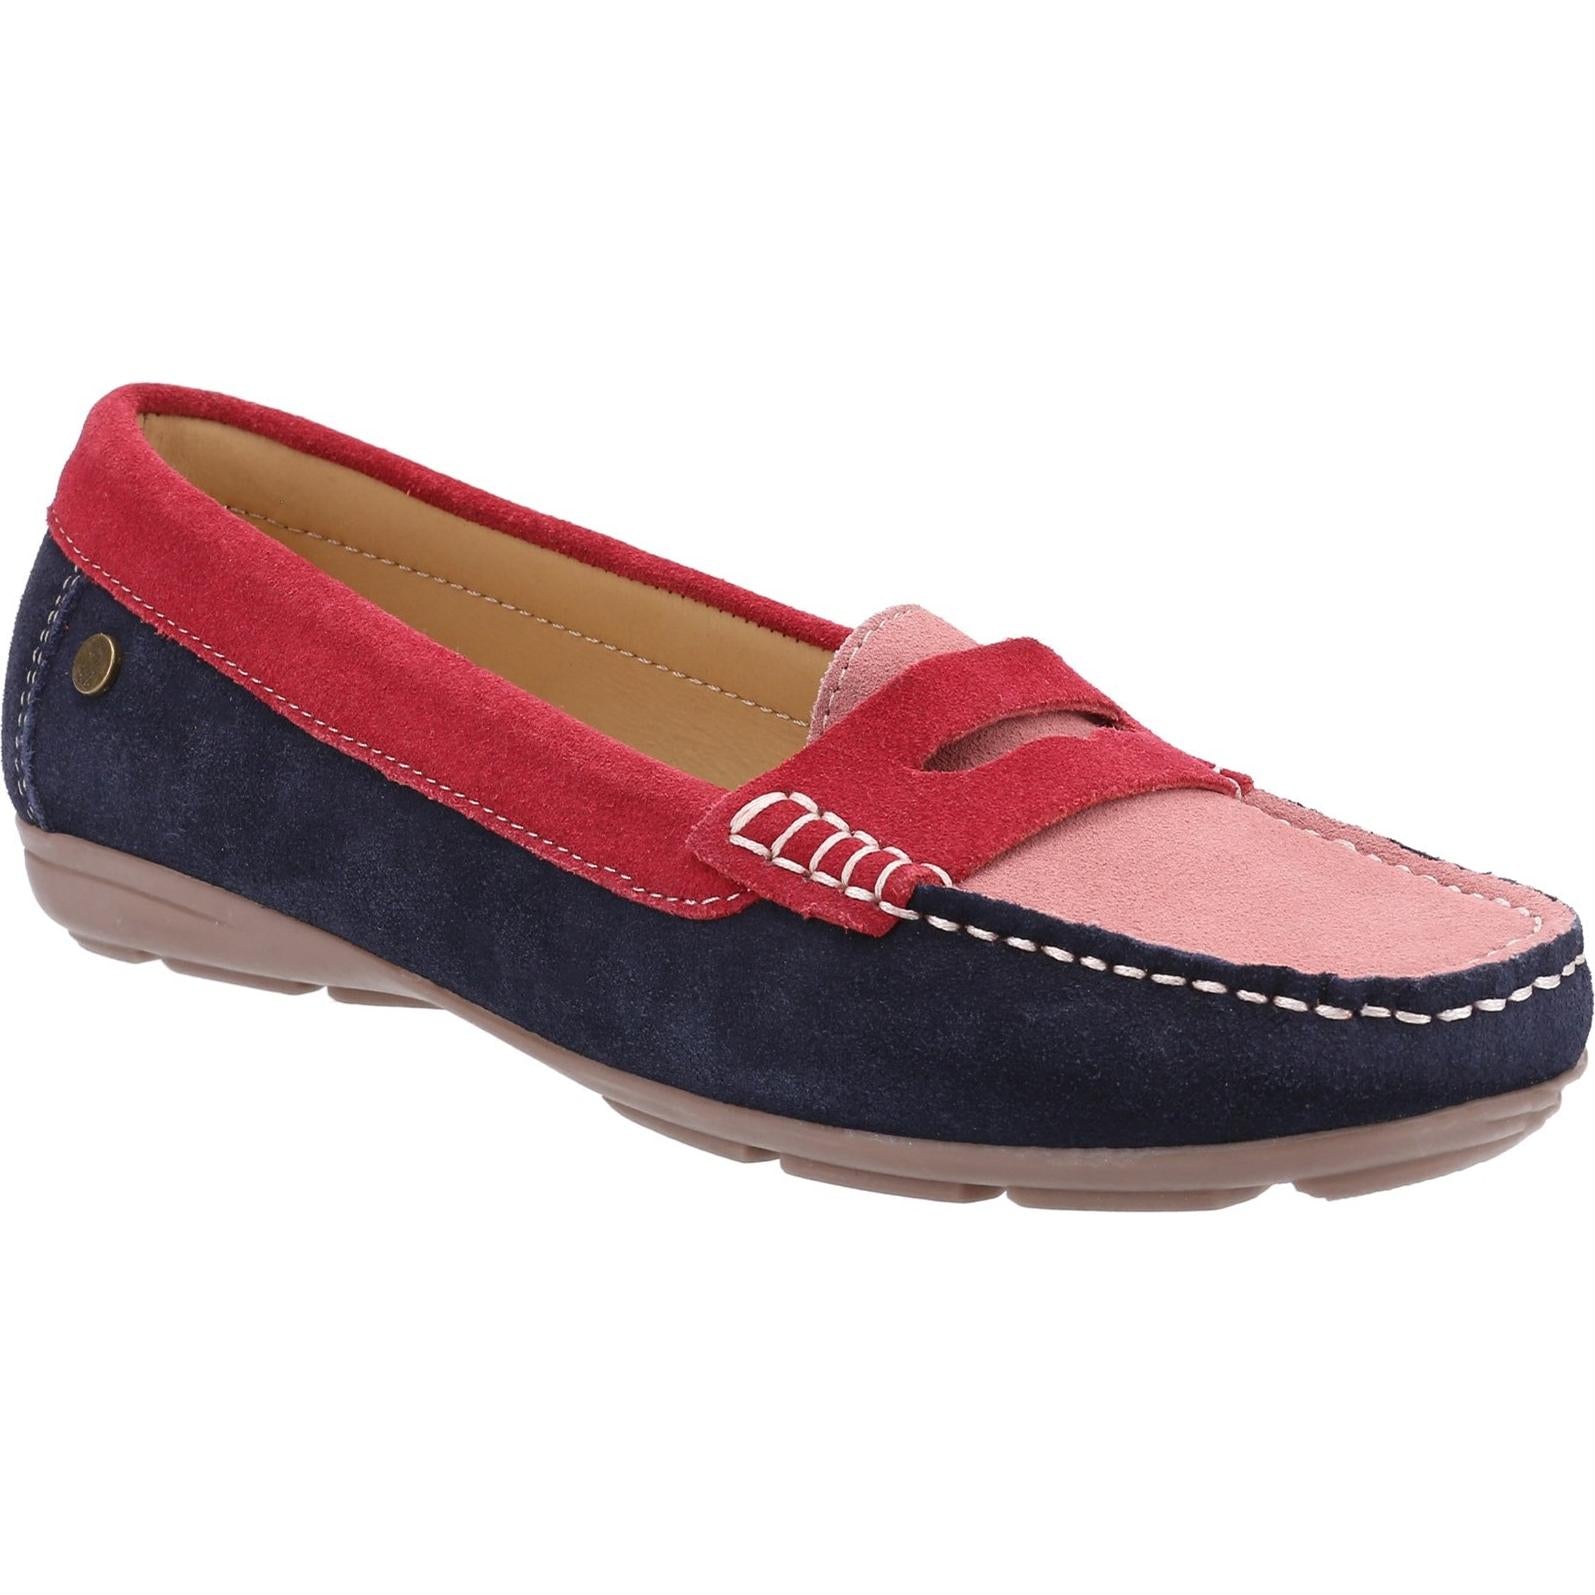 Hush Puppies Margot Multi Loafer Shoes